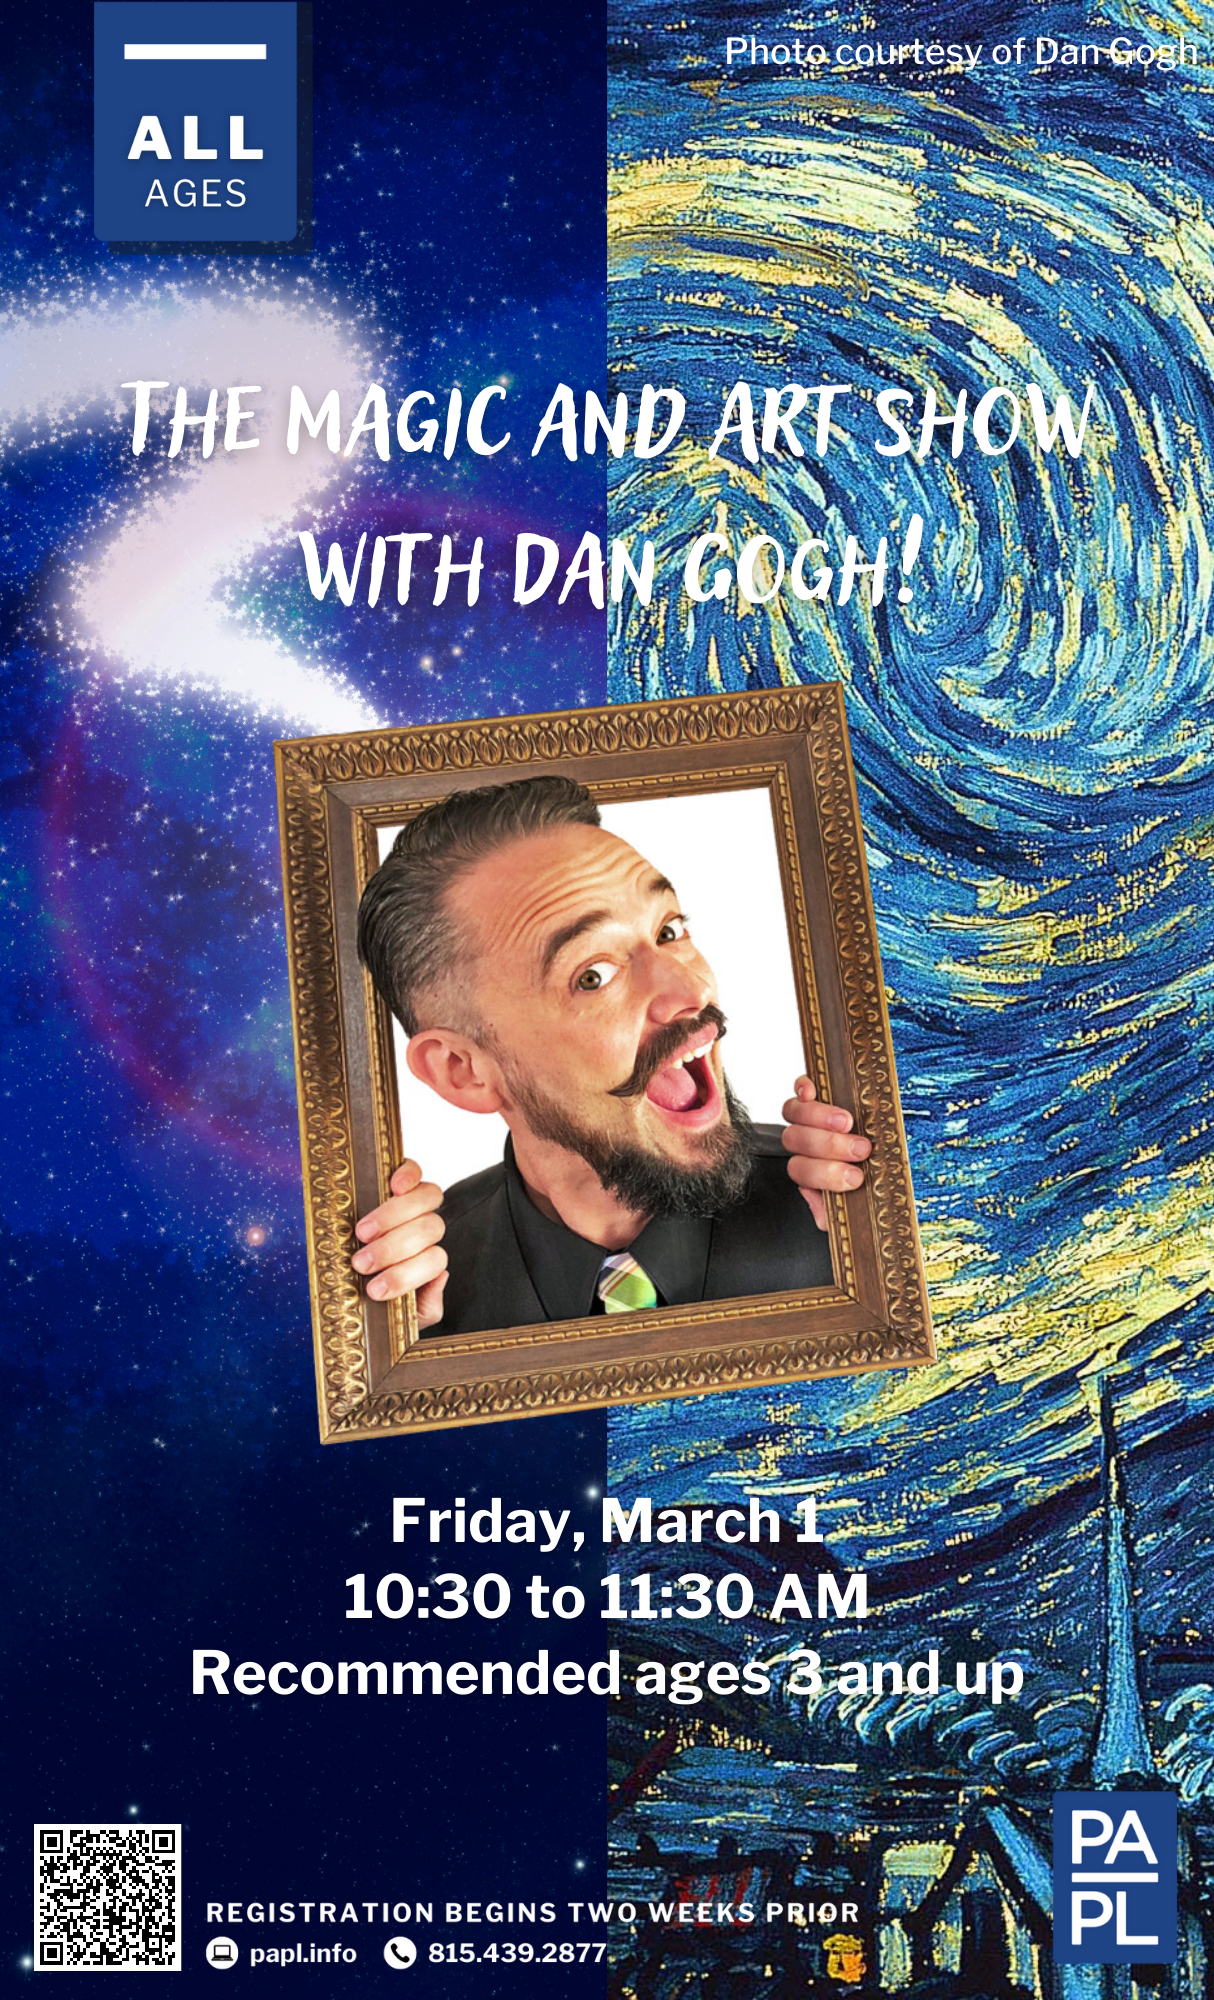 The Magic and Art Show with Dan Gogh!